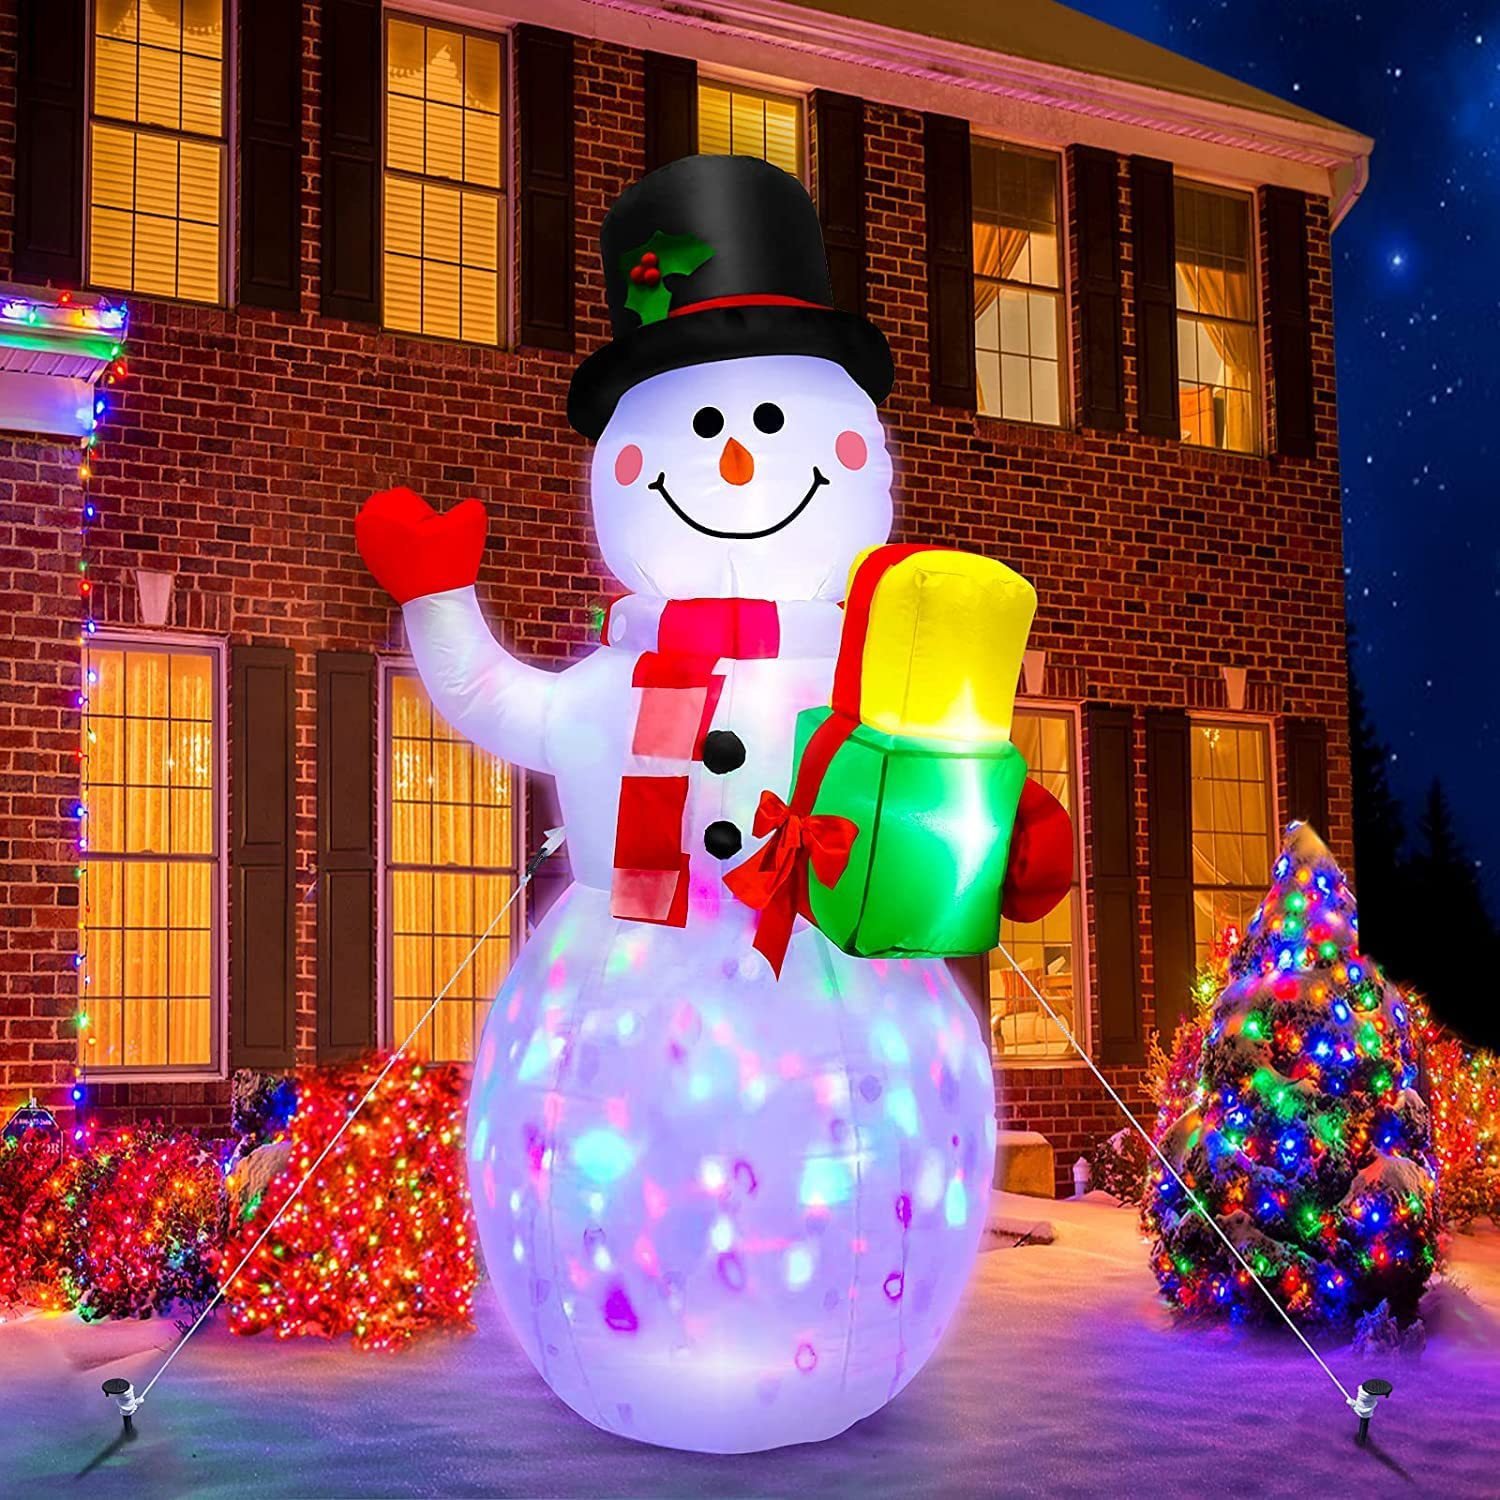 🎅🎁Christmas Sale 49% Off - Christmas Blow Ups Snowman Holding Gifts,With Colorful Rotating LED Lights